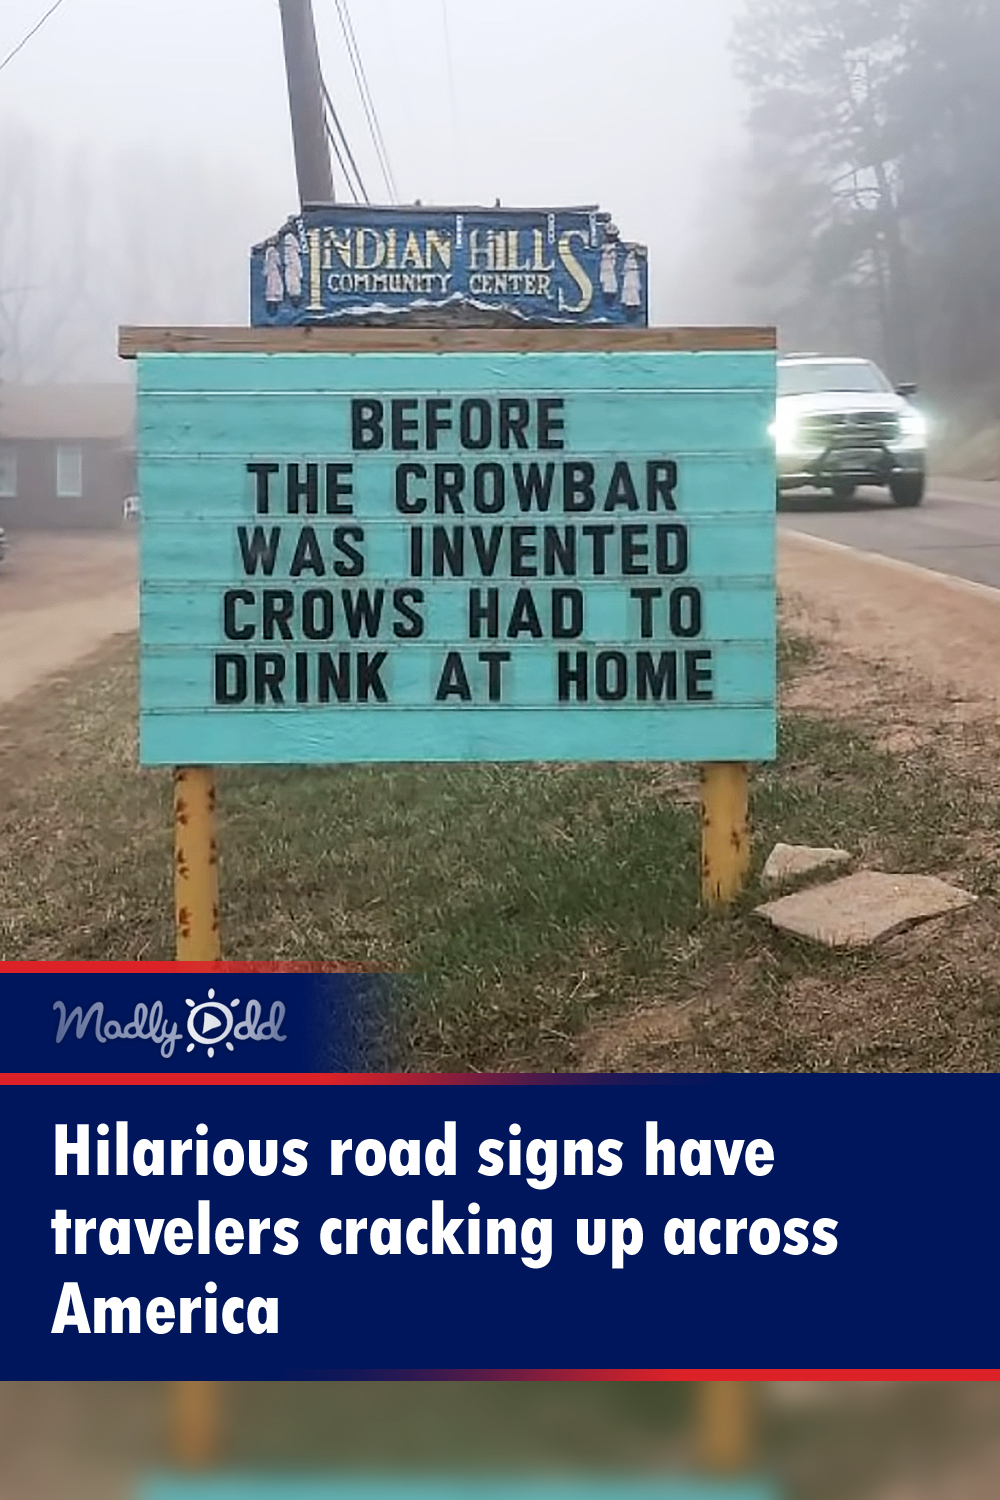 Hilarious road signs have travelers cracking up across America